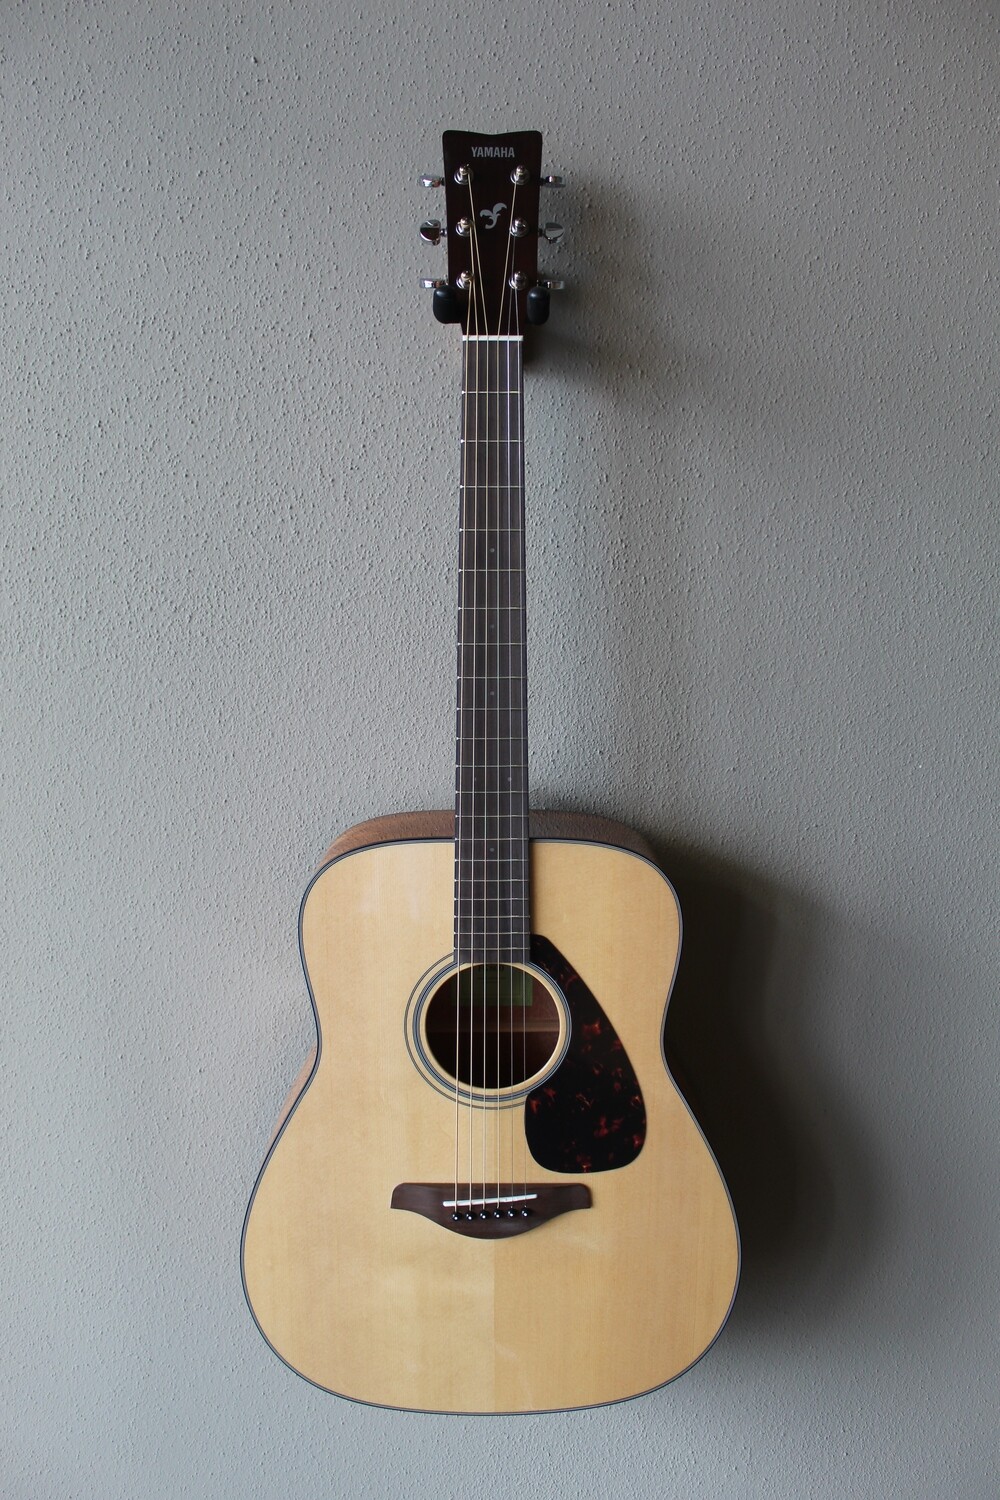 Yamaha FG800 Dreadnought Steel String Acoustic Guitar with Gig Bag